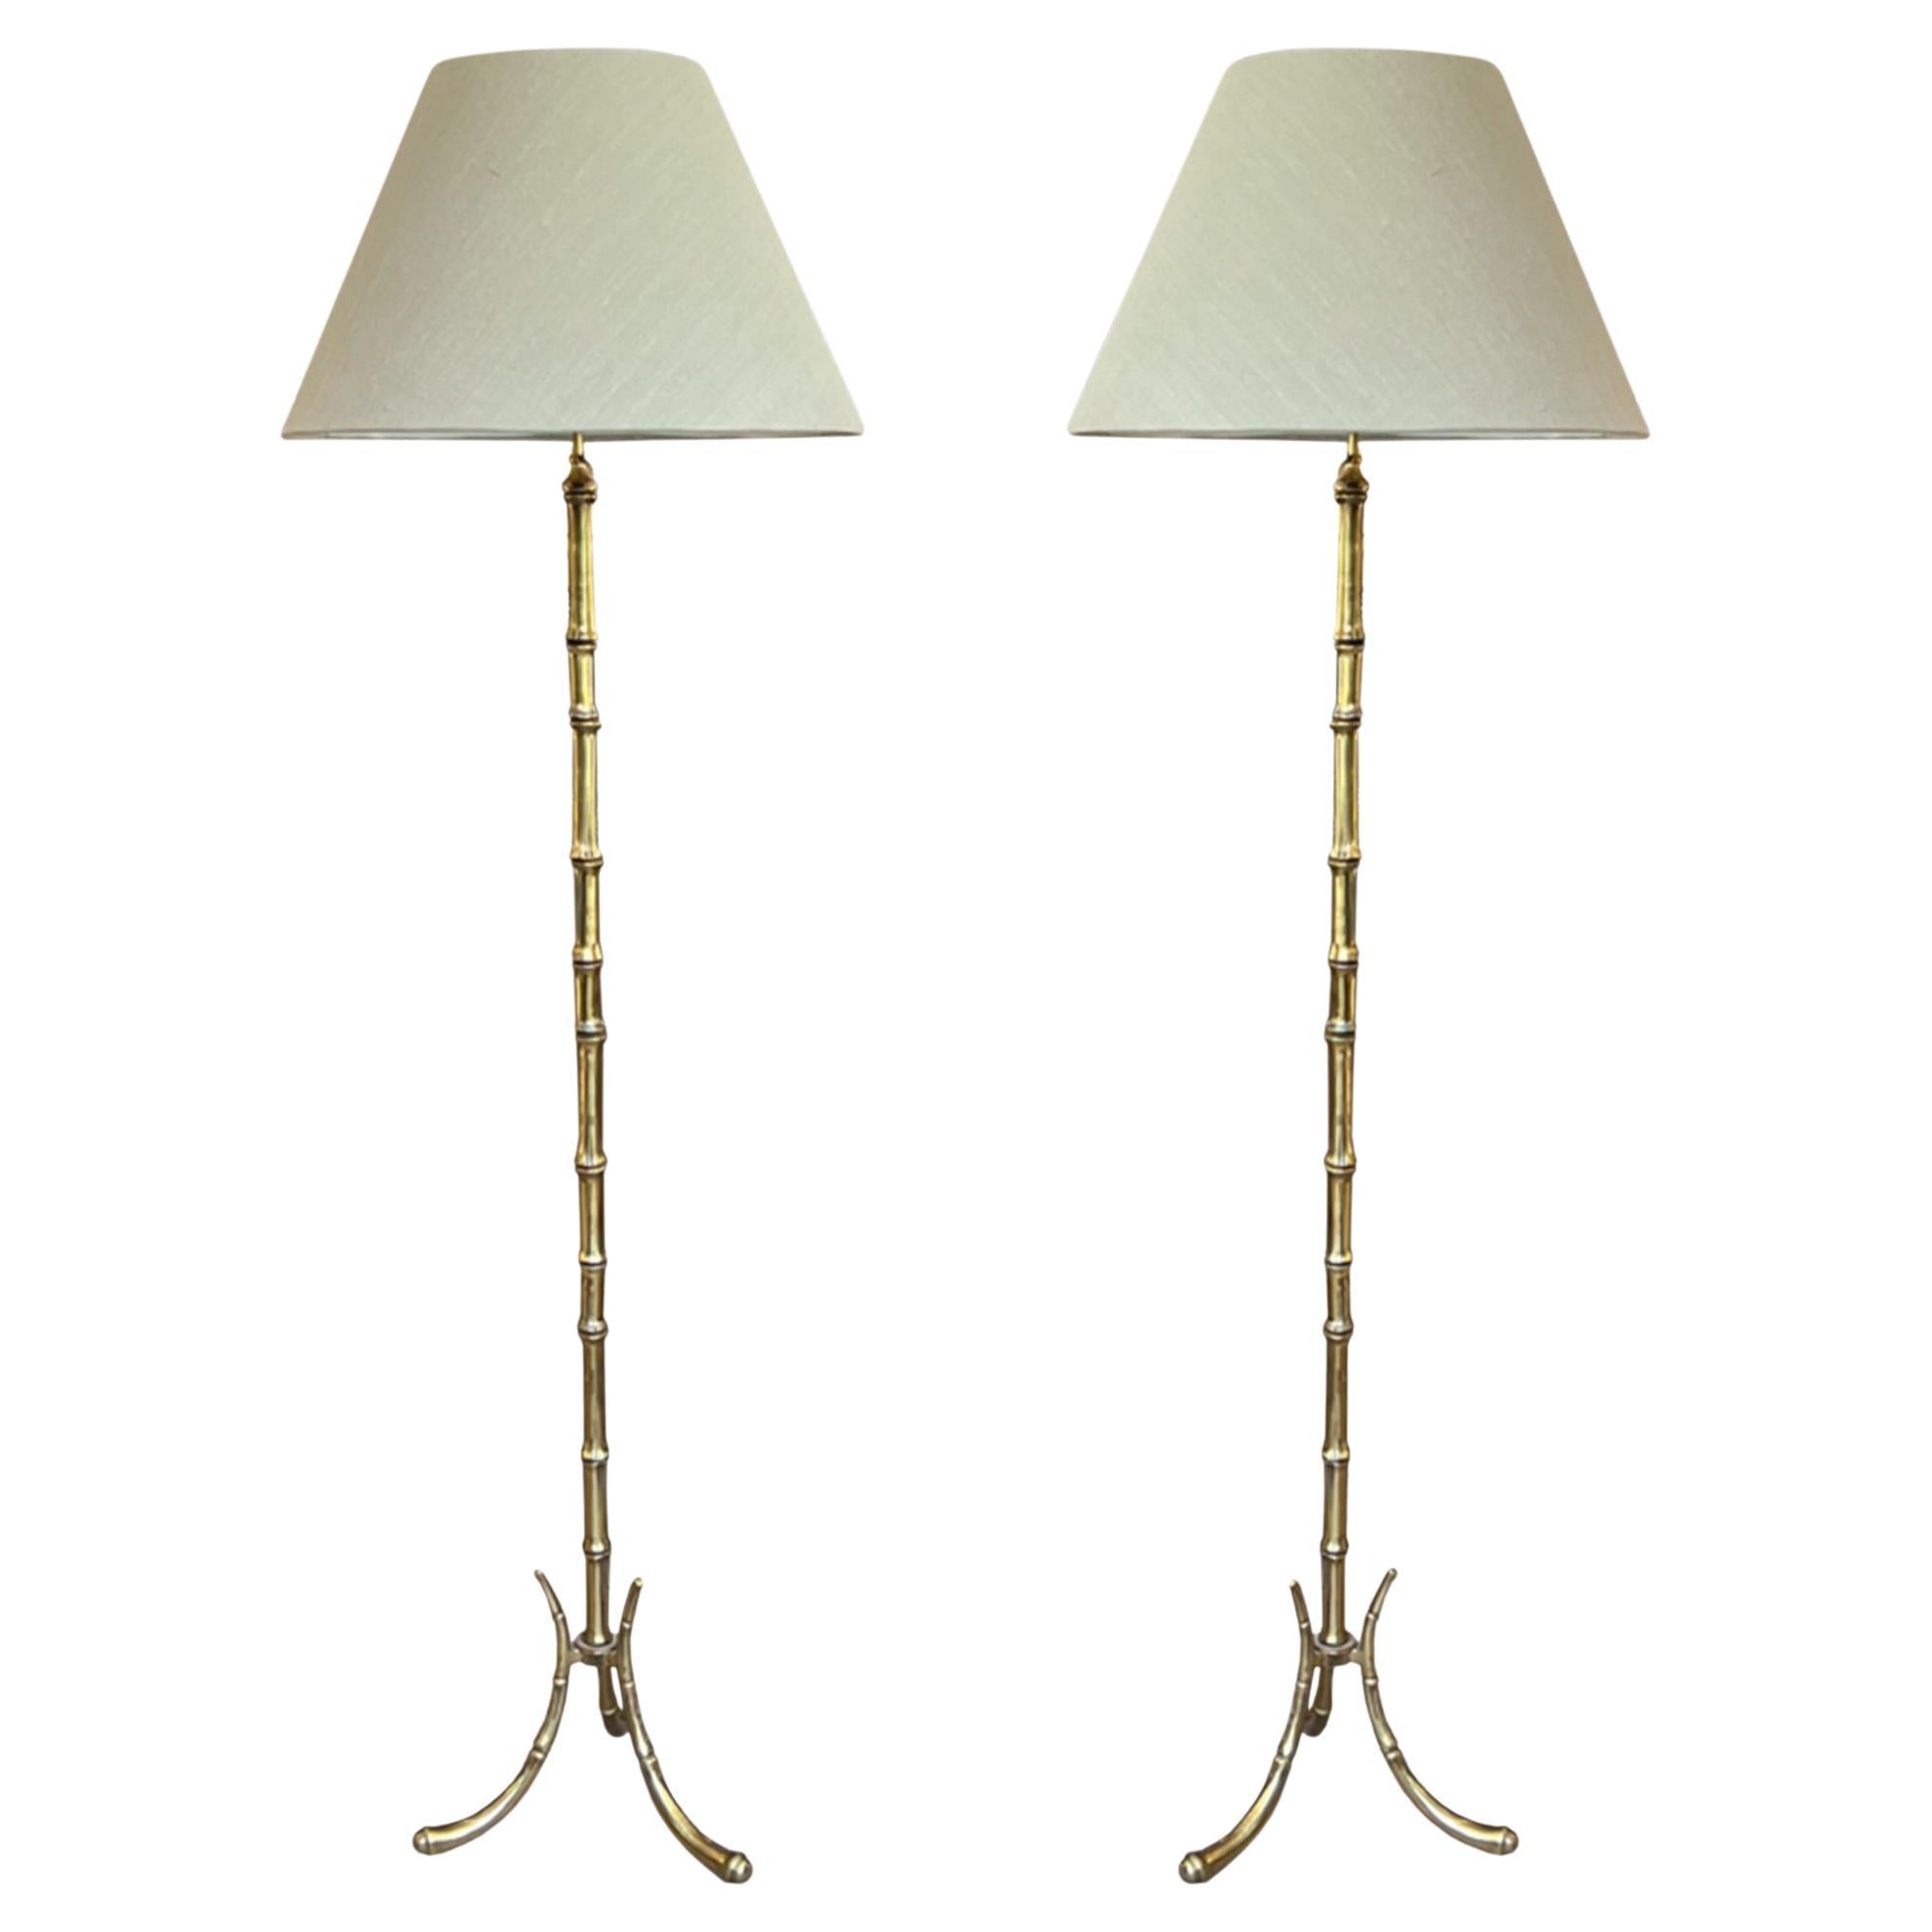 A Near Pair of French 1960s Faux Bamboo Bagués Style Floor Lamps